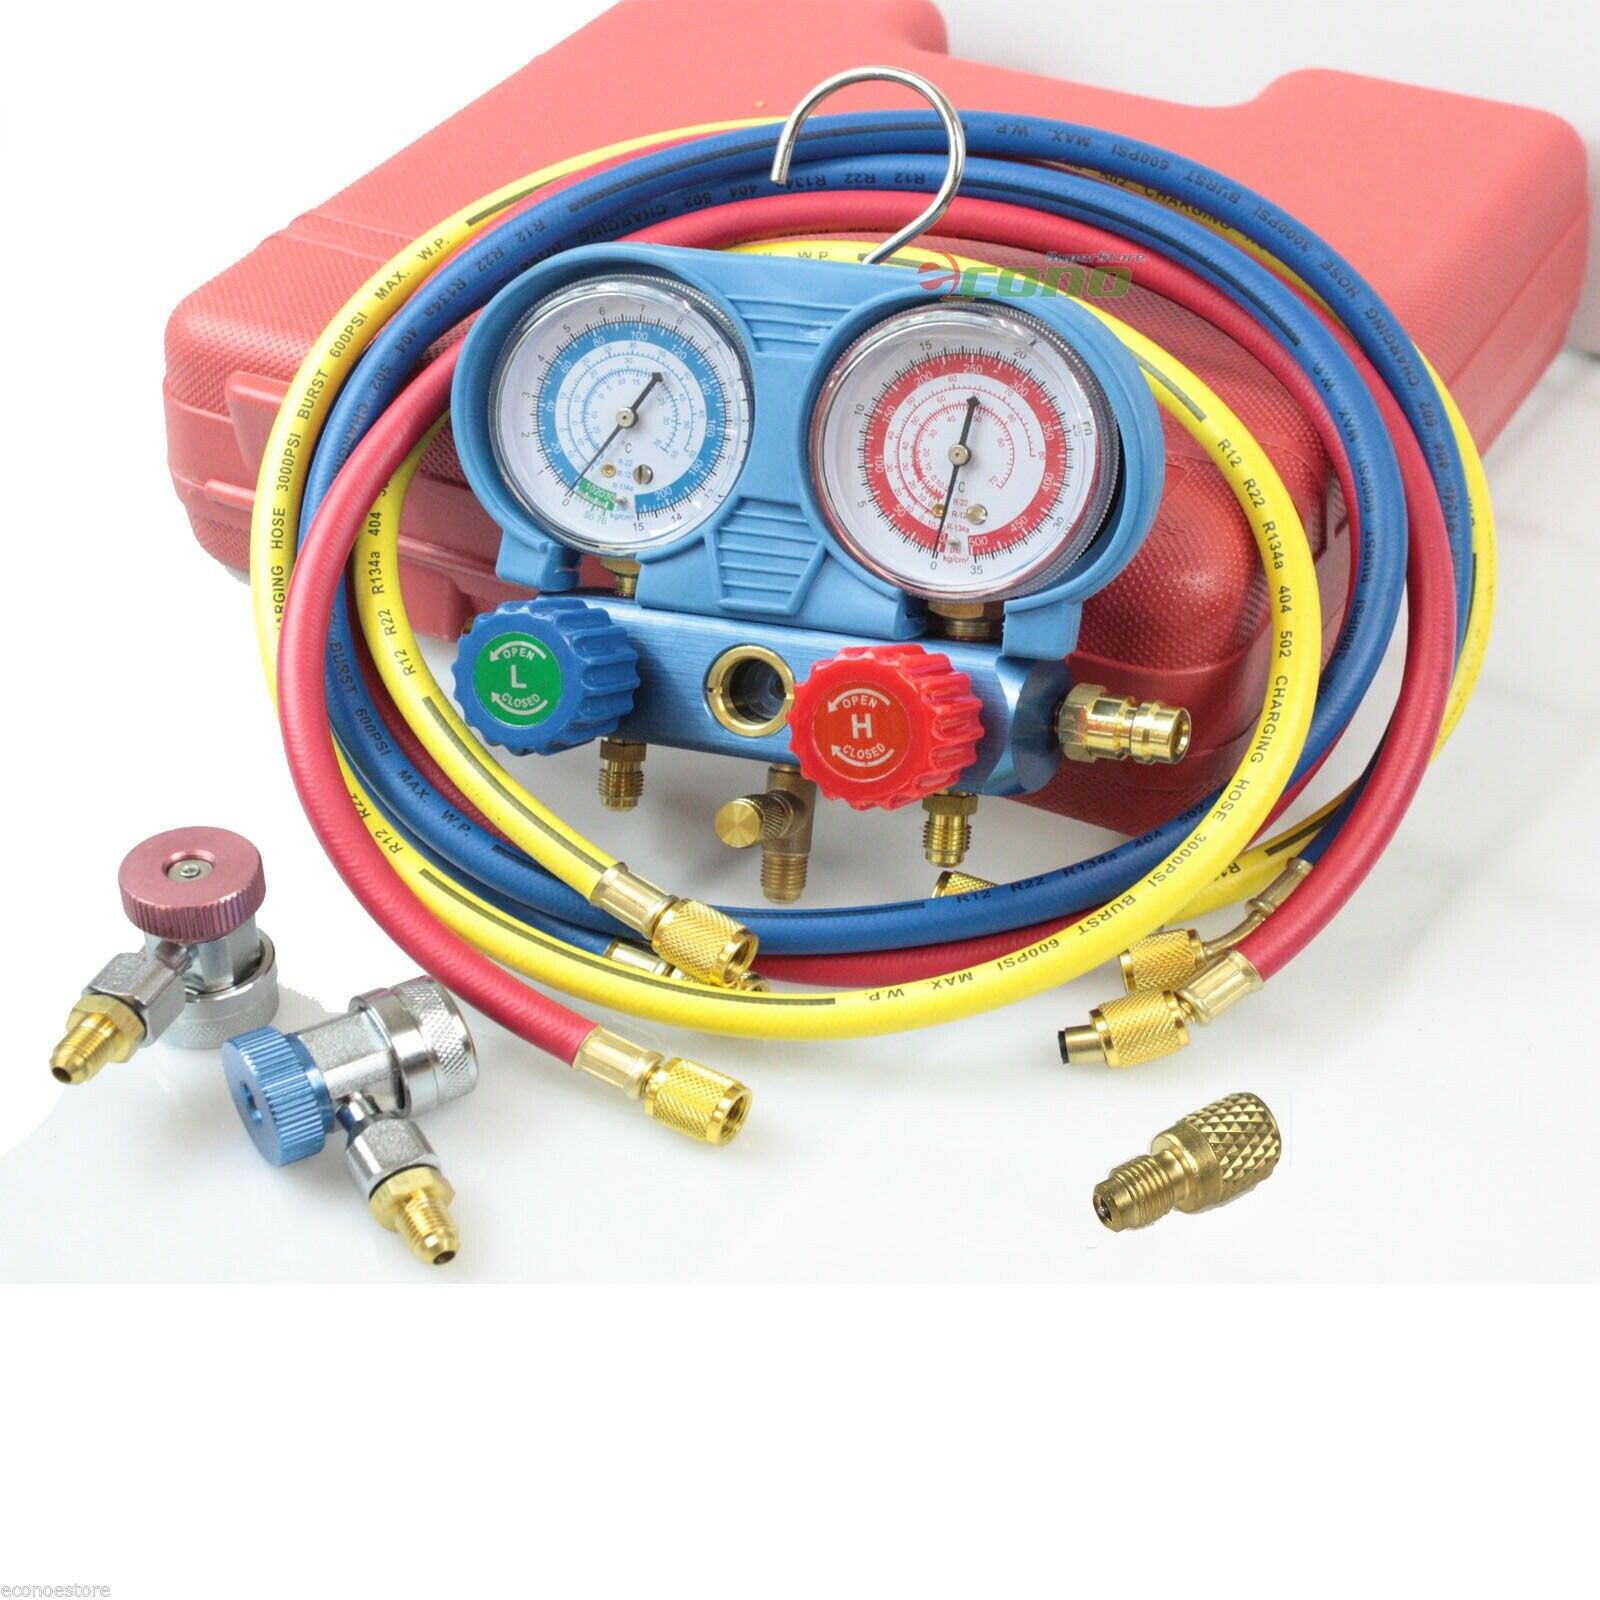 A/C Manifold Gauge And Hose Set With 3PC Connector Color Coded Gauges Valves And Hoses 